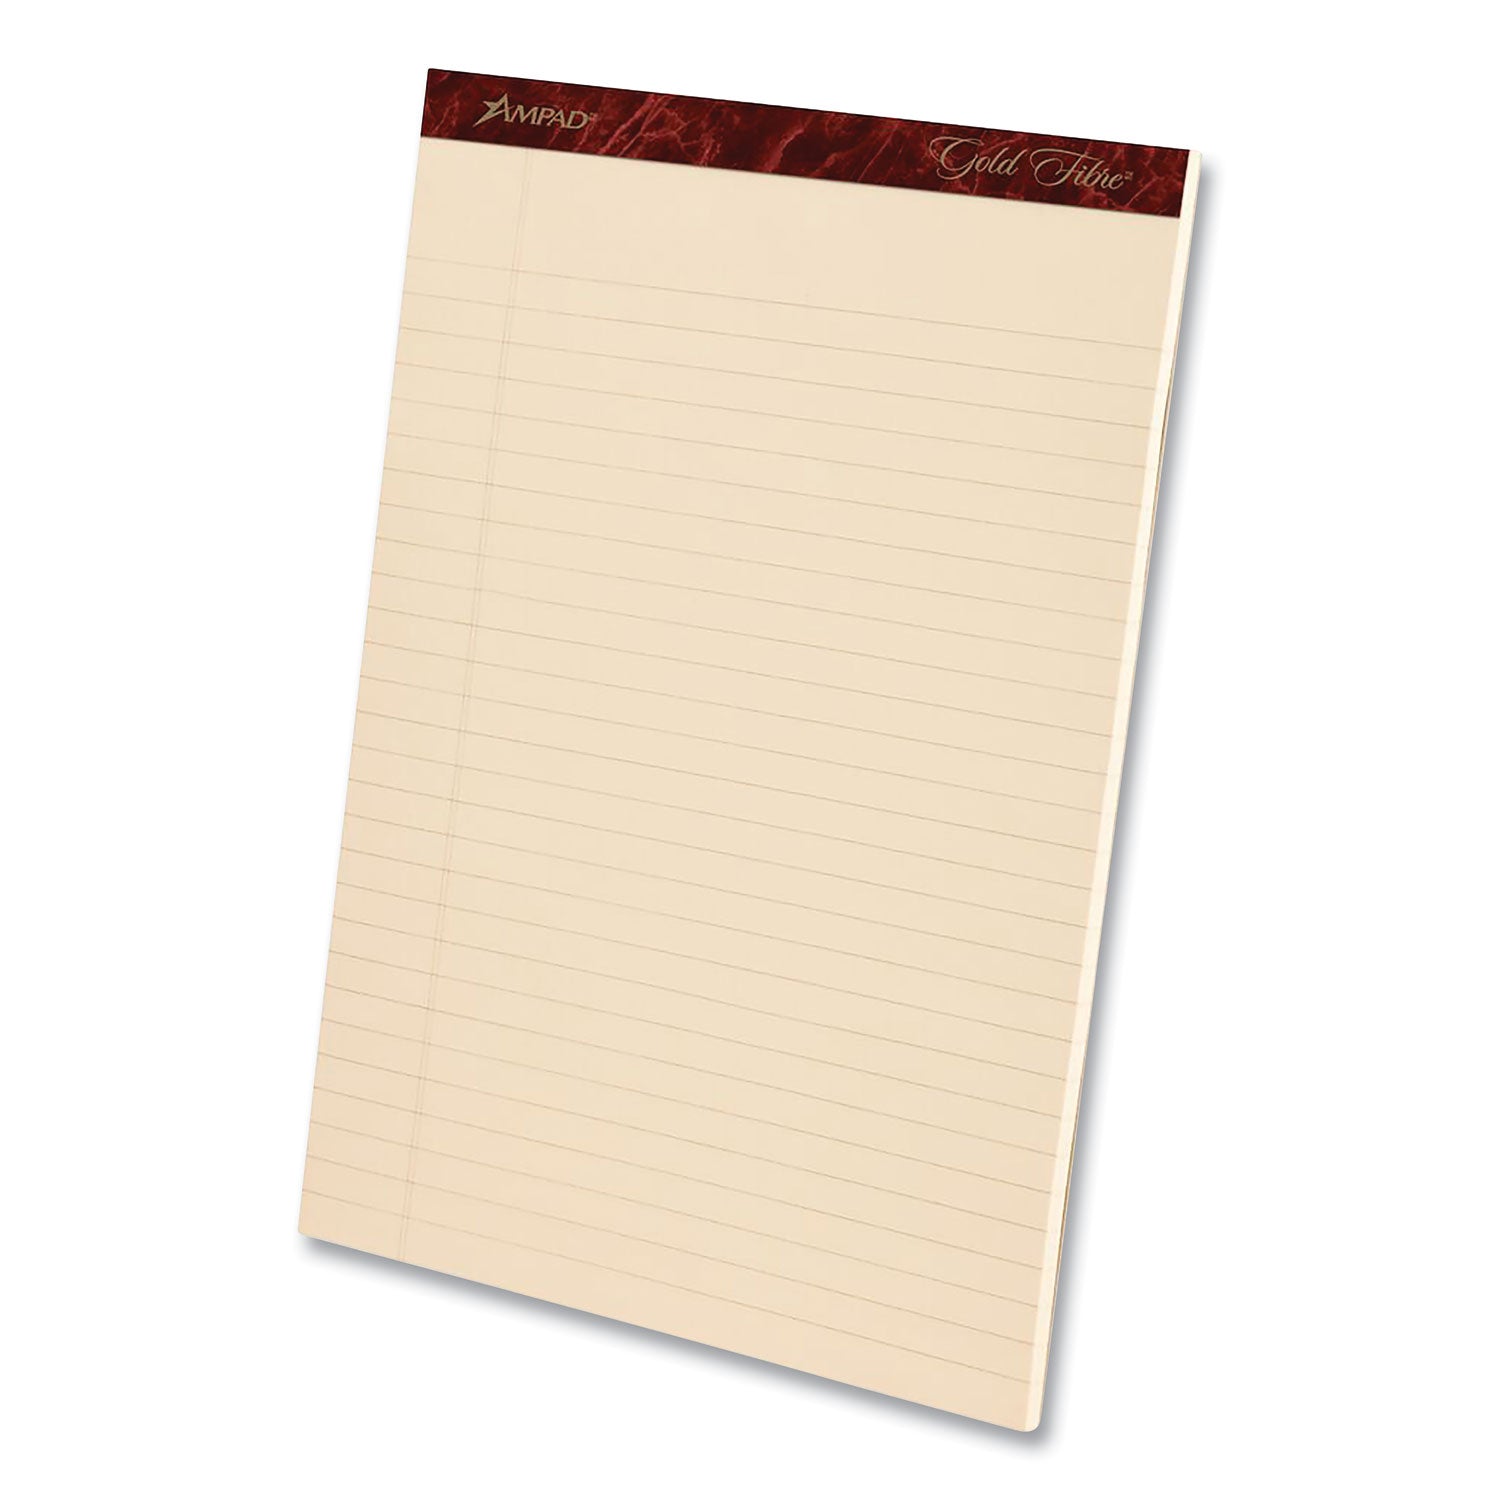 Gold Fibre Writing Pads, Narrow Rule, 50 Canary-Yellow 5 x 8 Sheets, 4/Pack - 